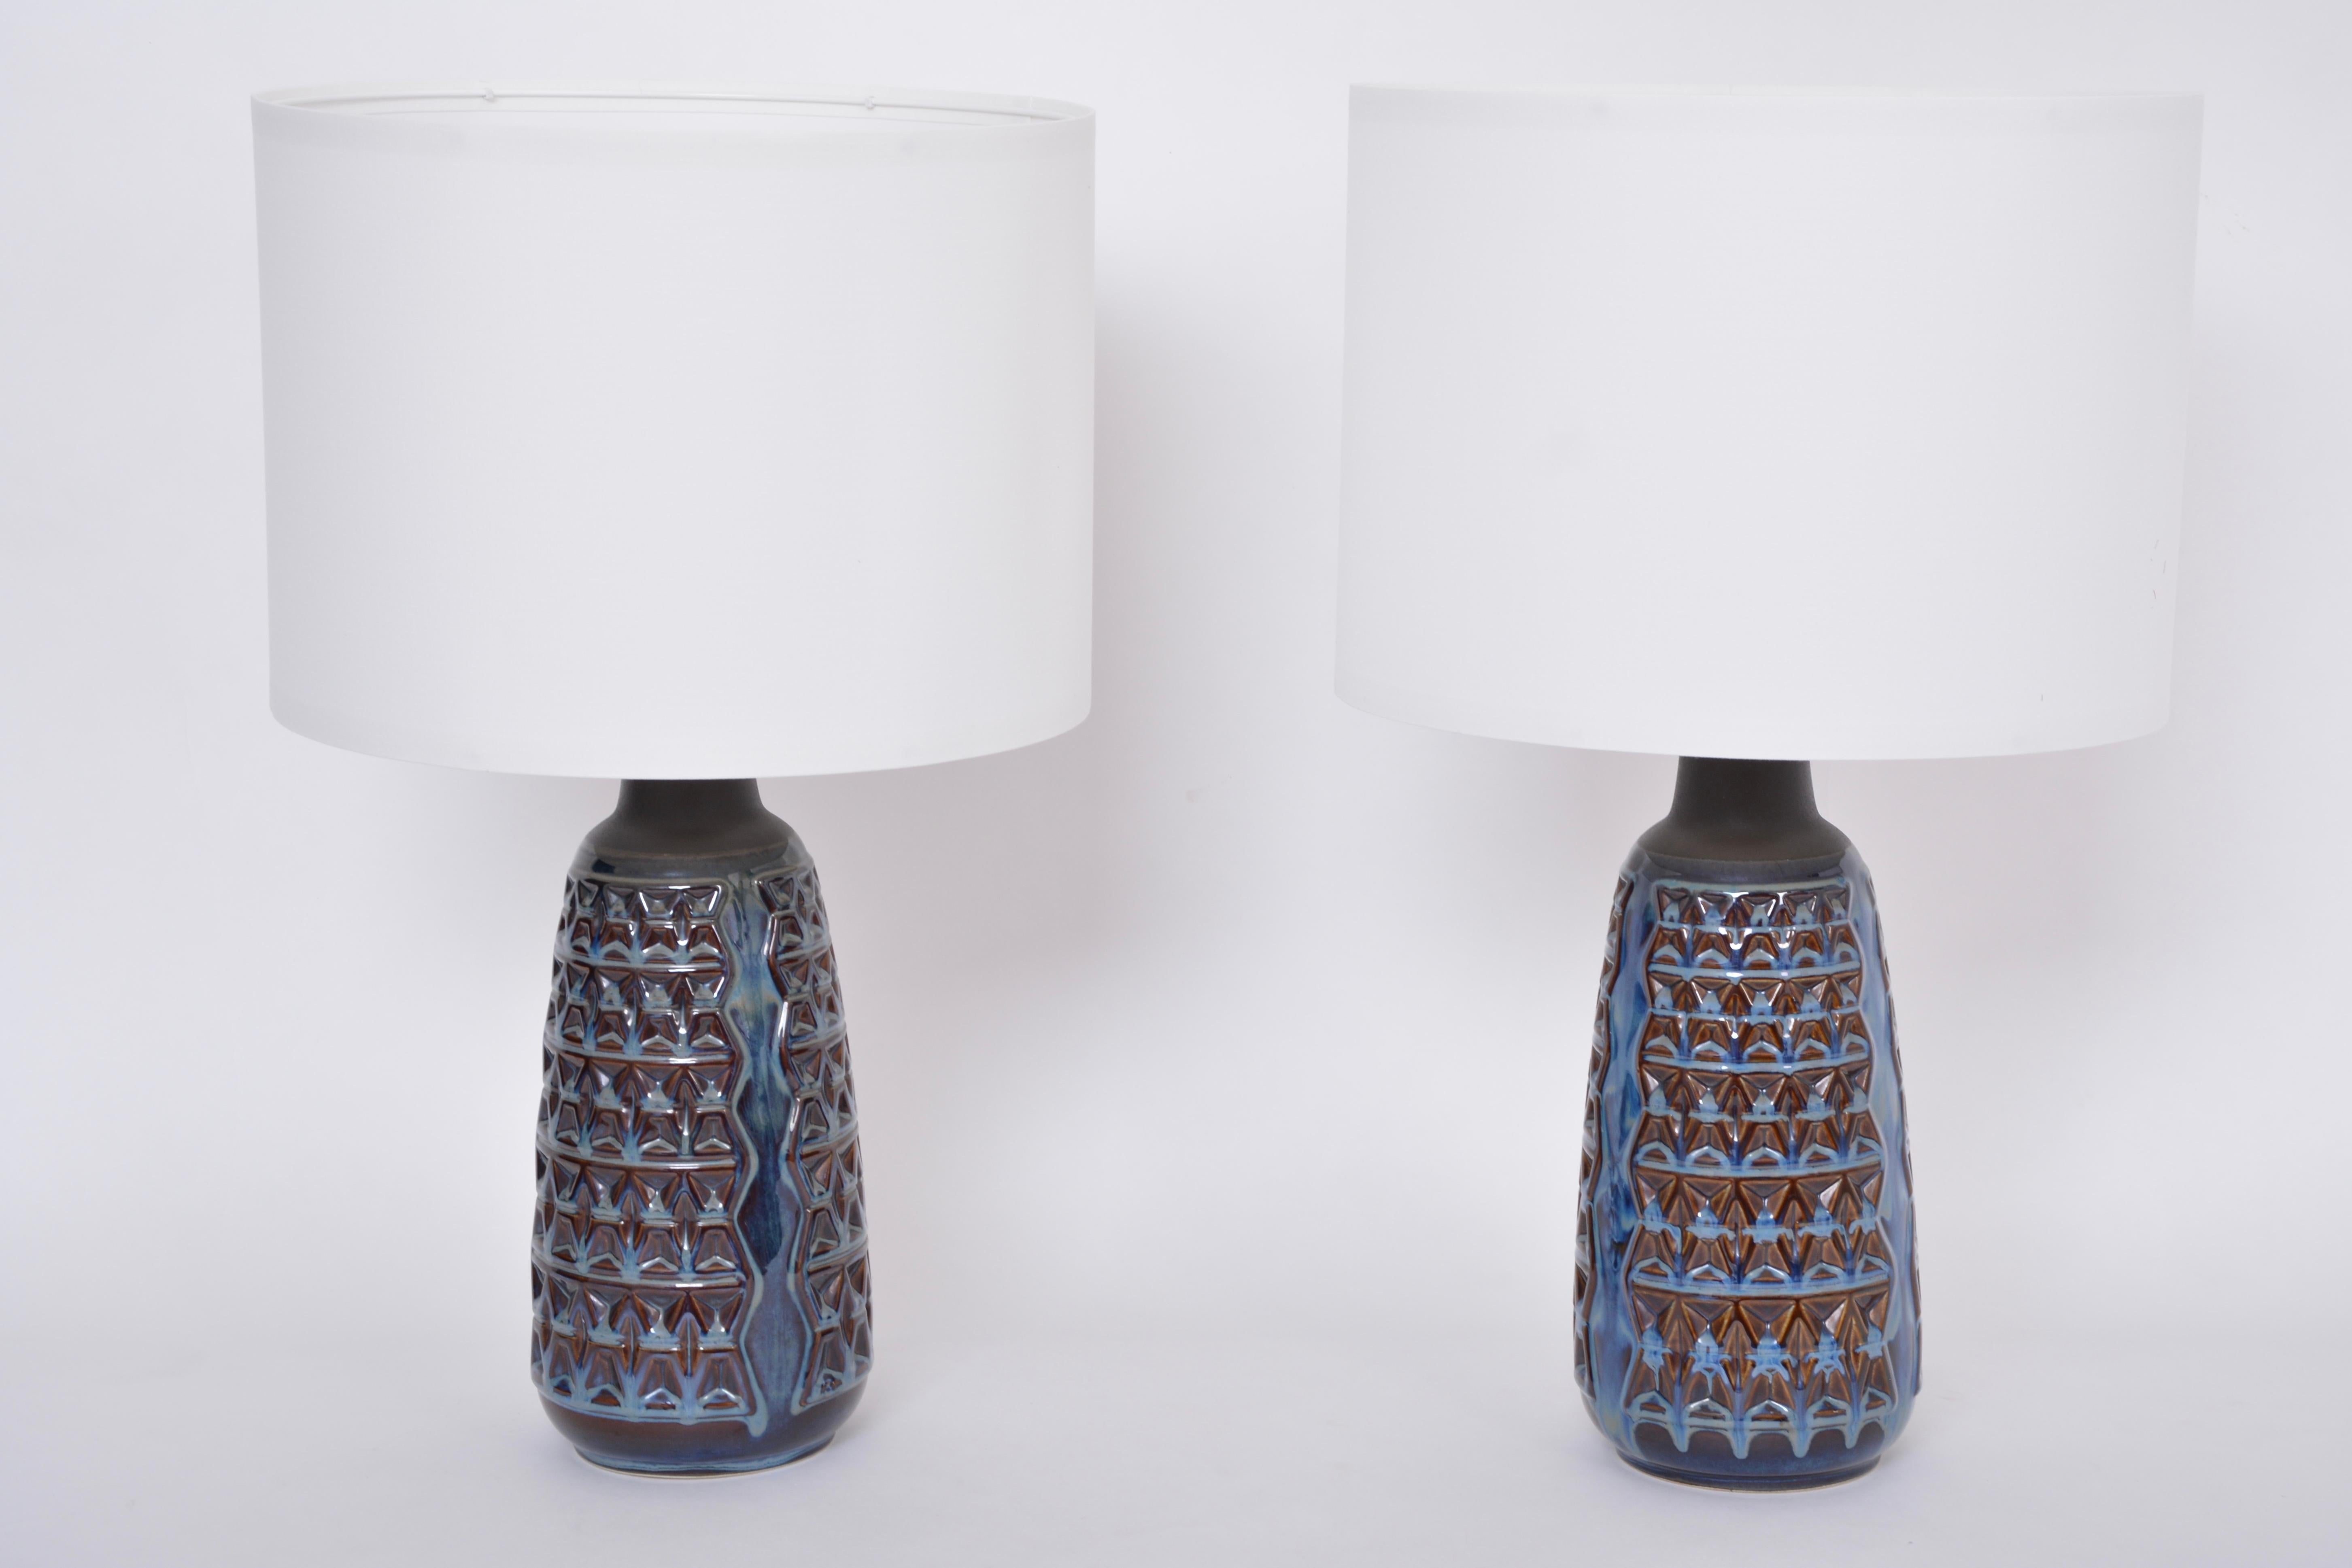 Danish Pair of Tall Blue Mid-Century Modern Table Lamps by Einar Johansen for Soholm